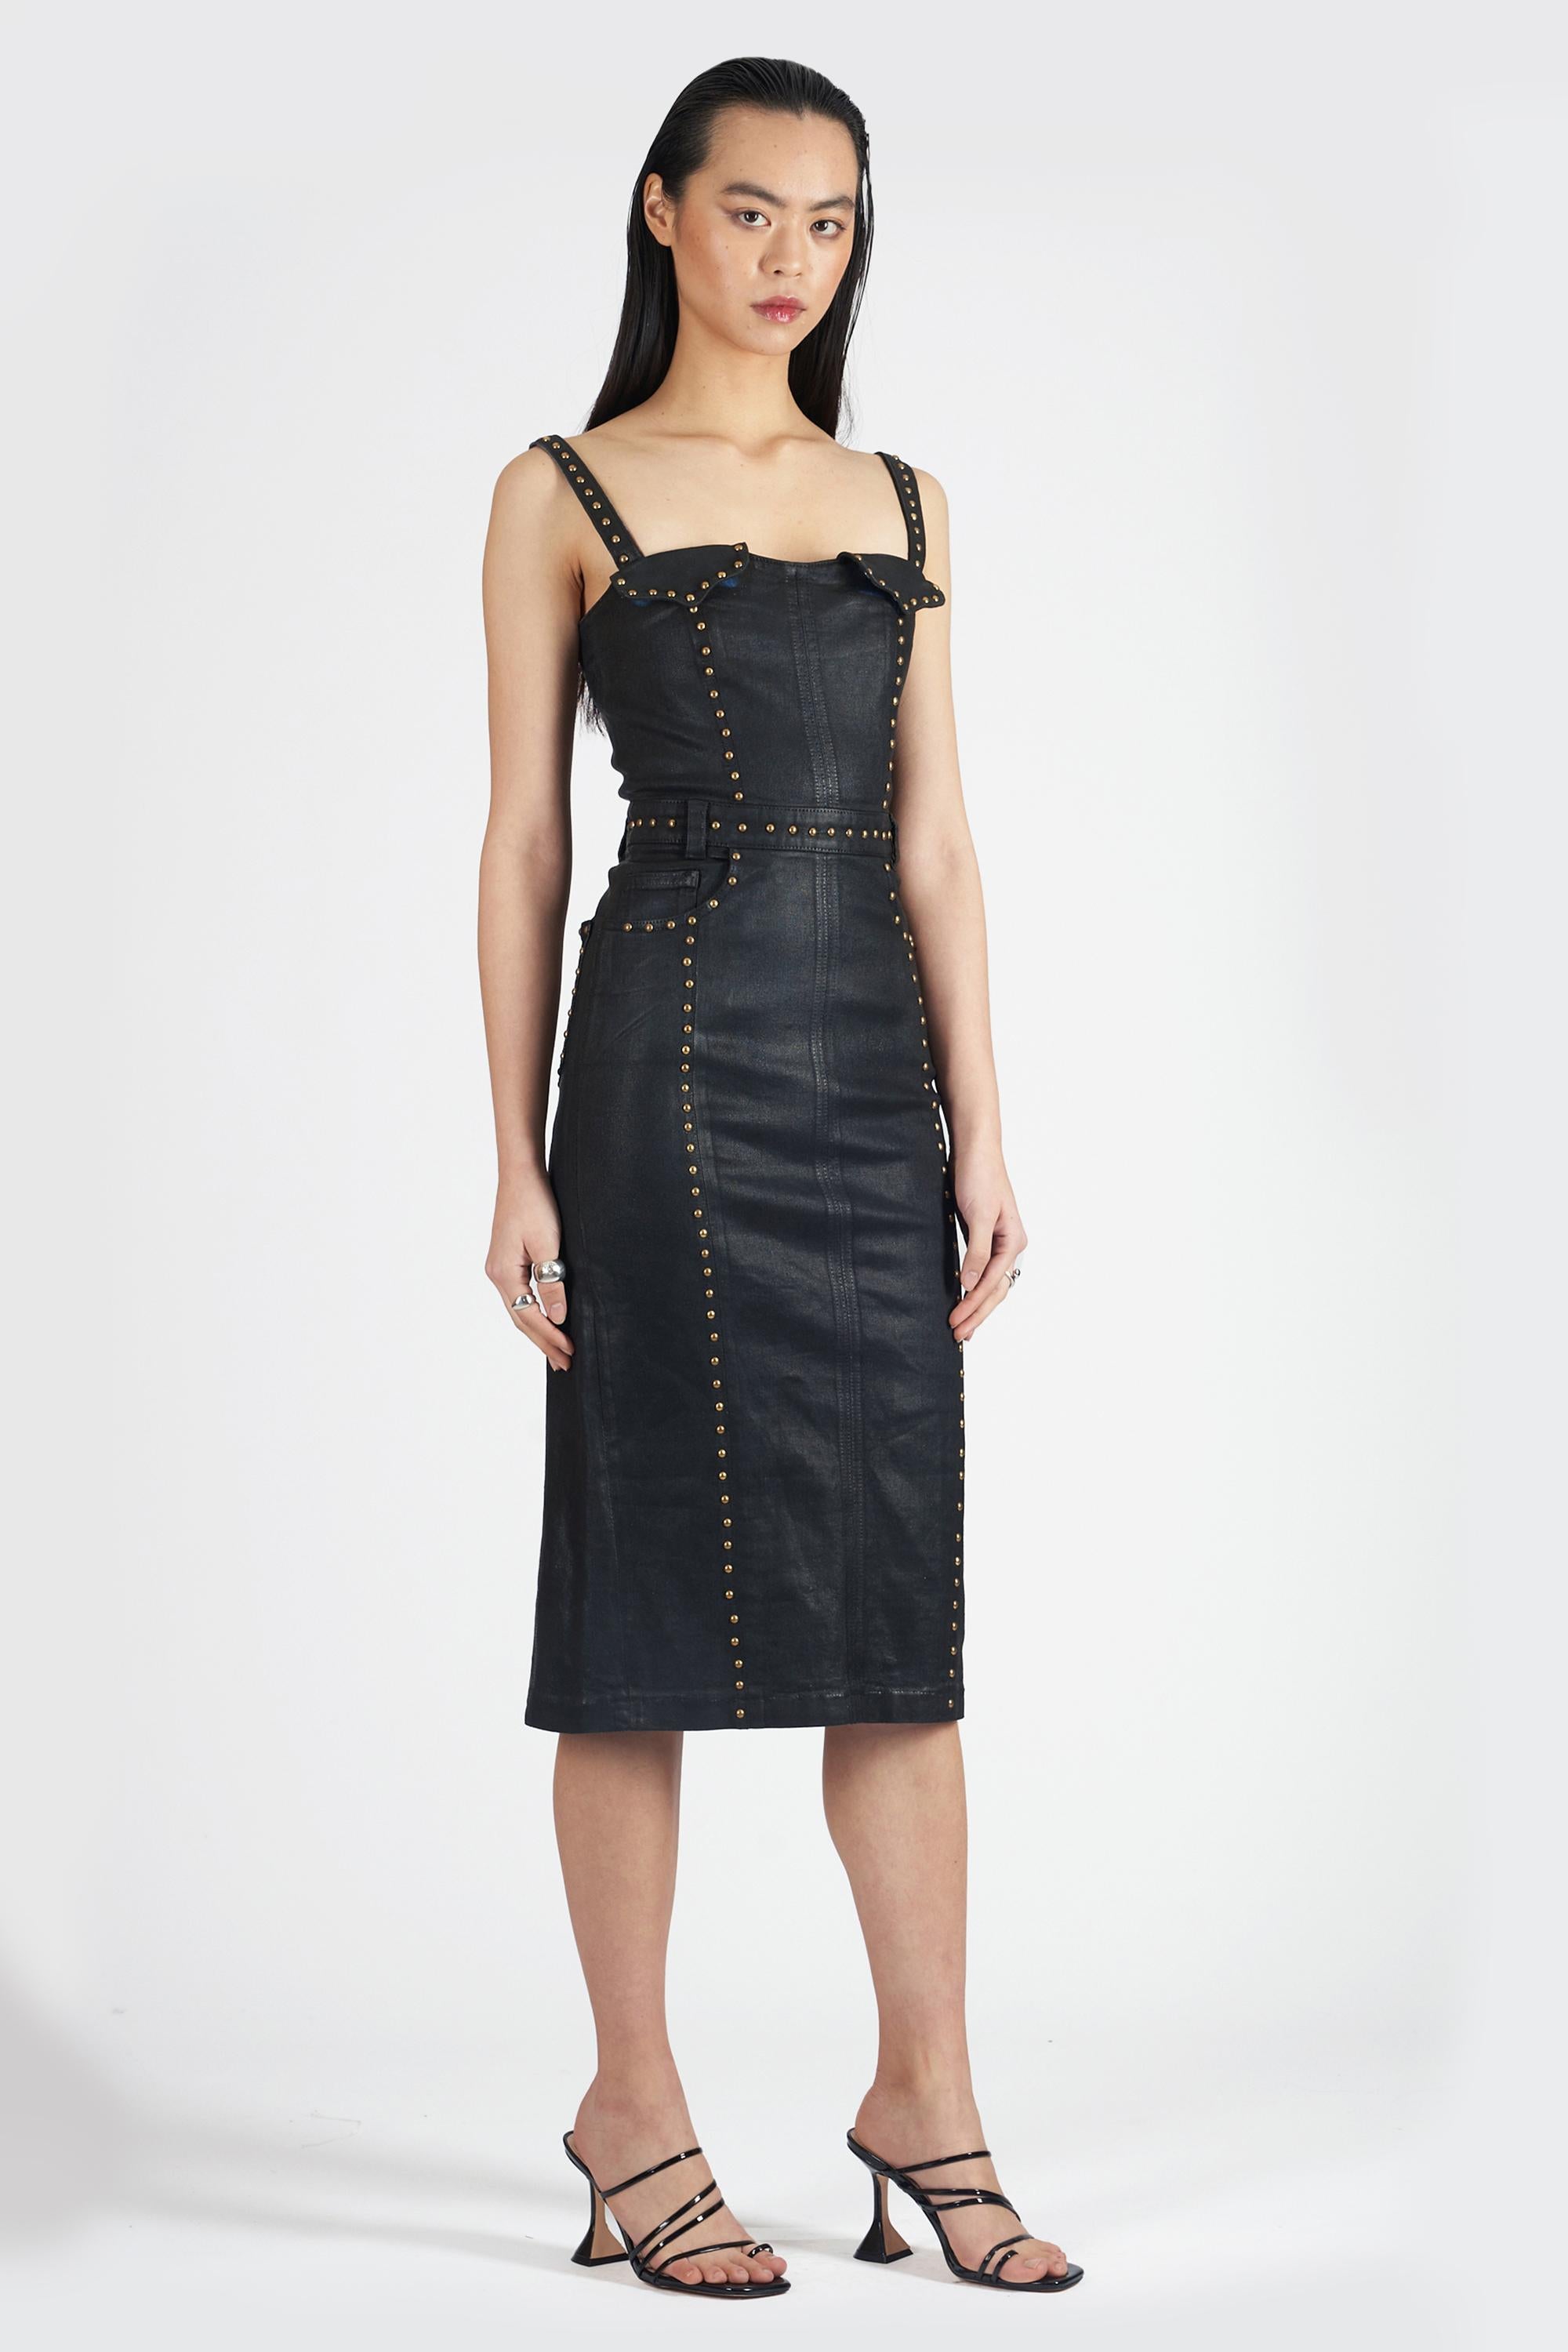 Versace Vintage 2000’s Denim Studded Midi Dress In Excellent Condition For Sale In London, GB